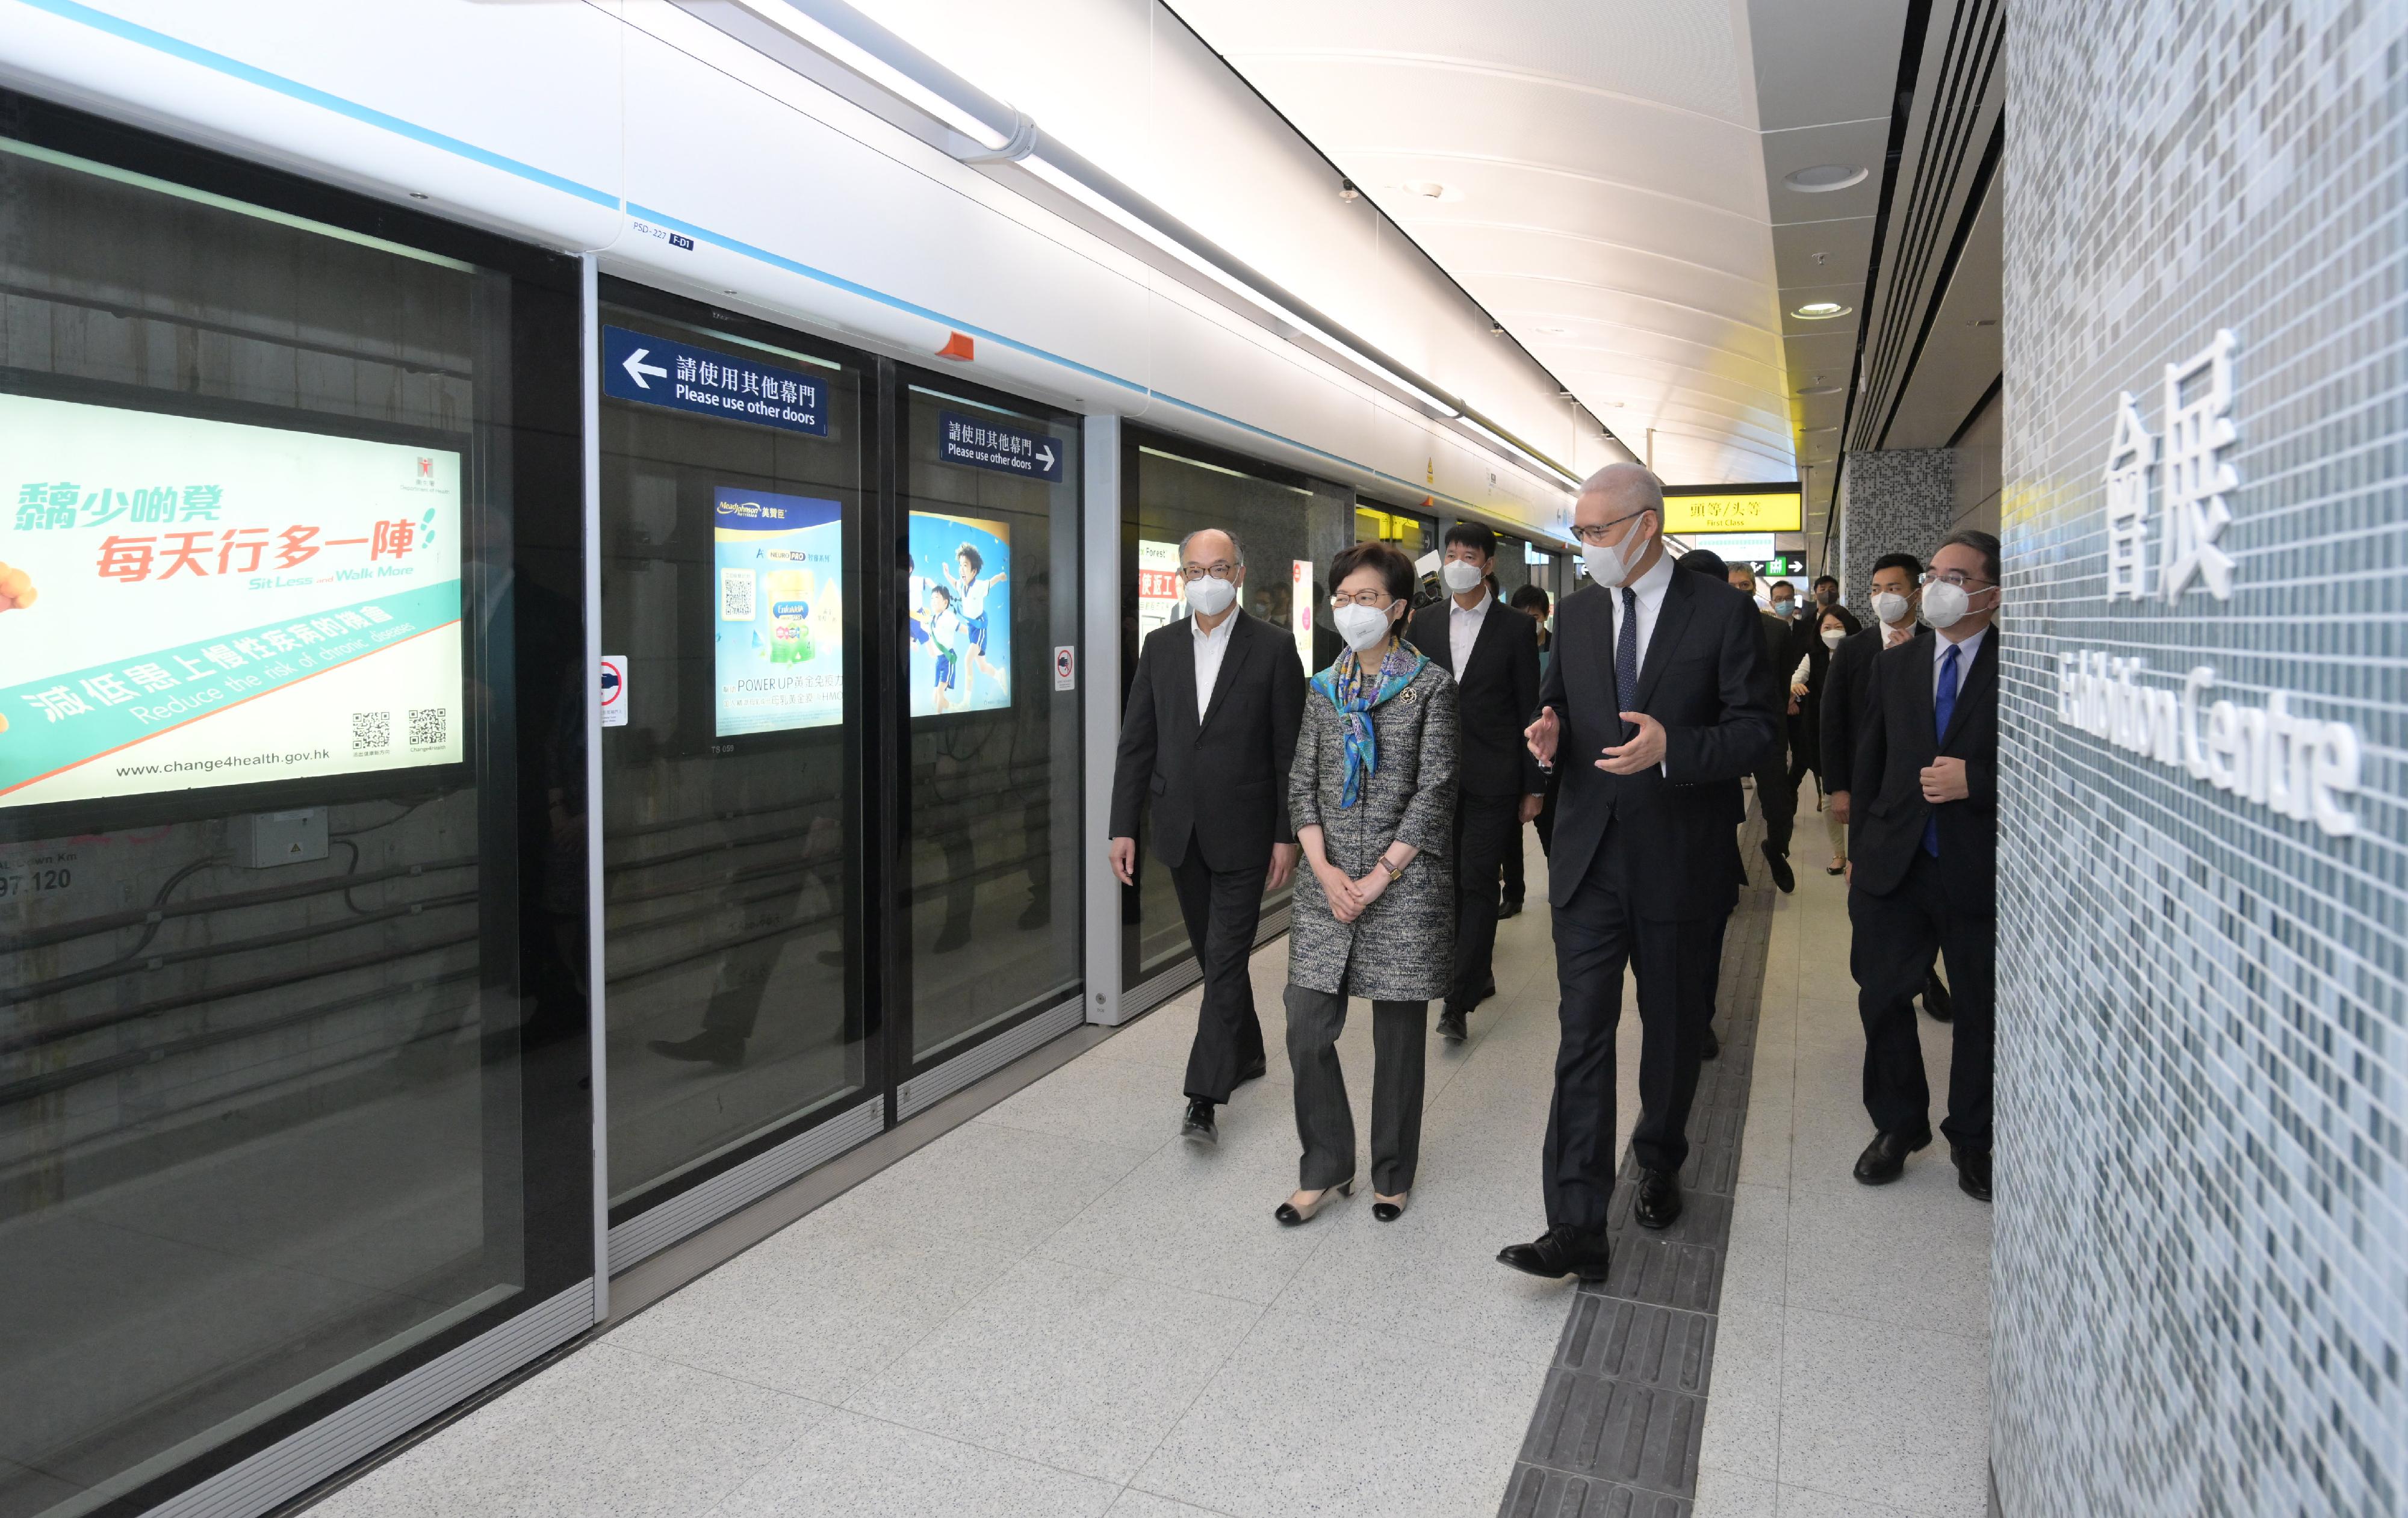 The Chief Executive, Mrs Carrie Lam, visited Wan Chai North today (May 4) to view the newly constructed Exhibition Centre Station of the East Rail Line cross-harbour extension and the neighbouring facilities. Photo shows Mrs Lam (second left) visiting the station's platform. Looking on are the Secretary for Transport and Housing, Mr Frank Chan Fan (first left); the Director of Highways, Mr Jimmy Chan (third left); the Chairman of the MTR Corporation Limited (MTRCL), Dr Rex Auyeung (fourth left); and the Chief Executive Officer of the MTRCL, Dr Jacob Kam (first right).